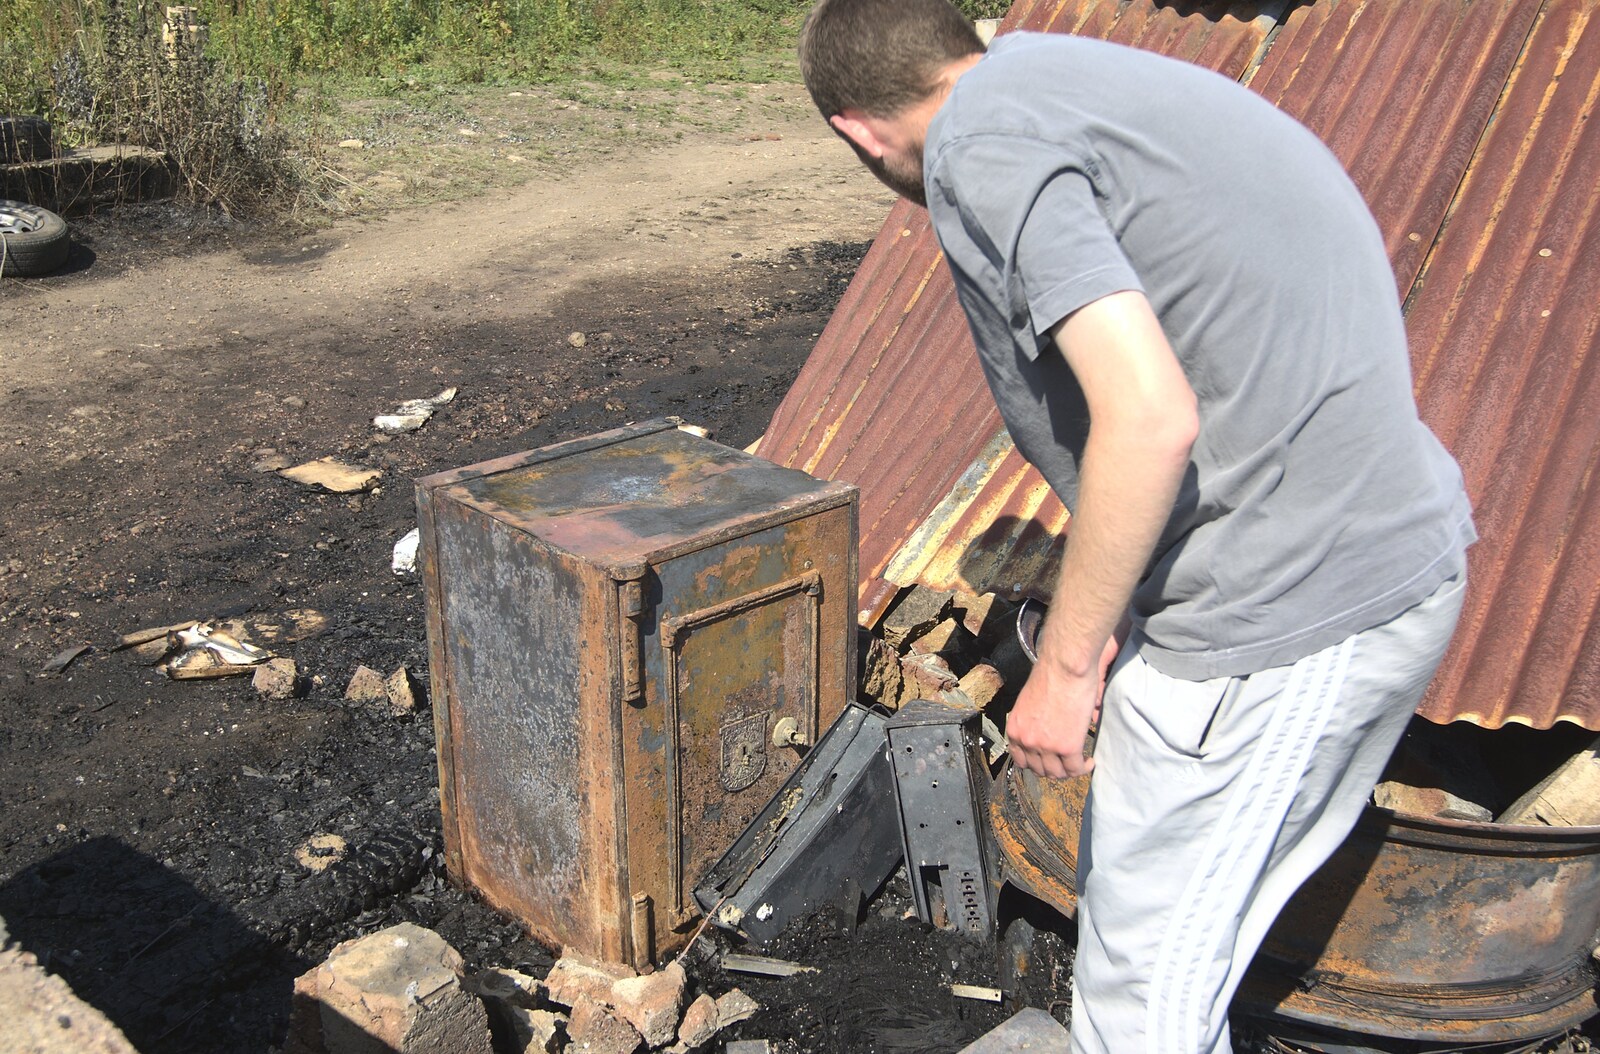 The Boy Phil inspects his prized safe - now wrecked from A Fire at Valley Farm, Thrandeston, Suffolk - 24th June 2009